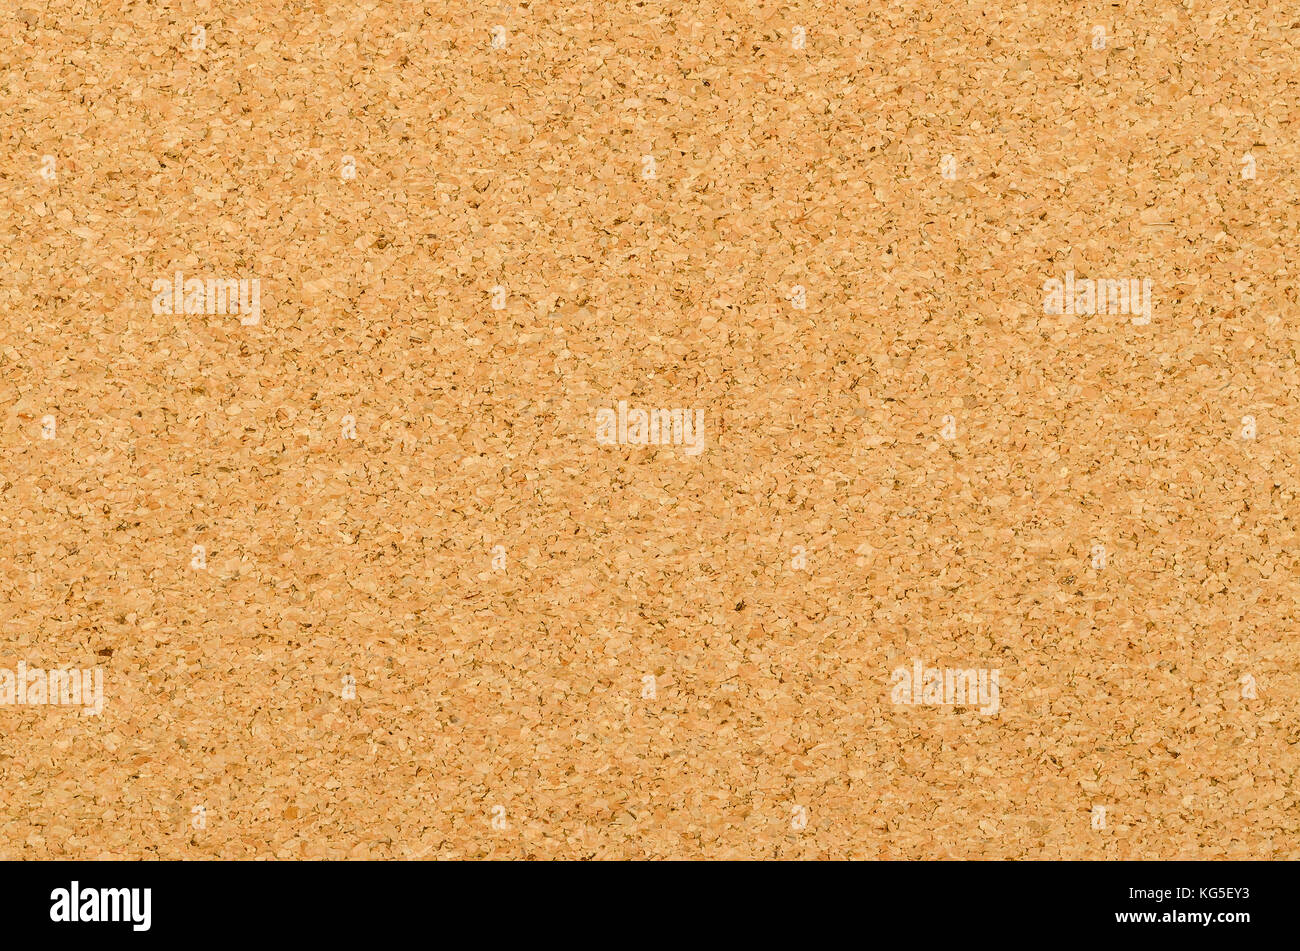 Cork sheet surface with fine texture, comprised of small grained cork oak, Quercus suber. Decorative panels and veneers, used as bulletin boards. Stock Photo